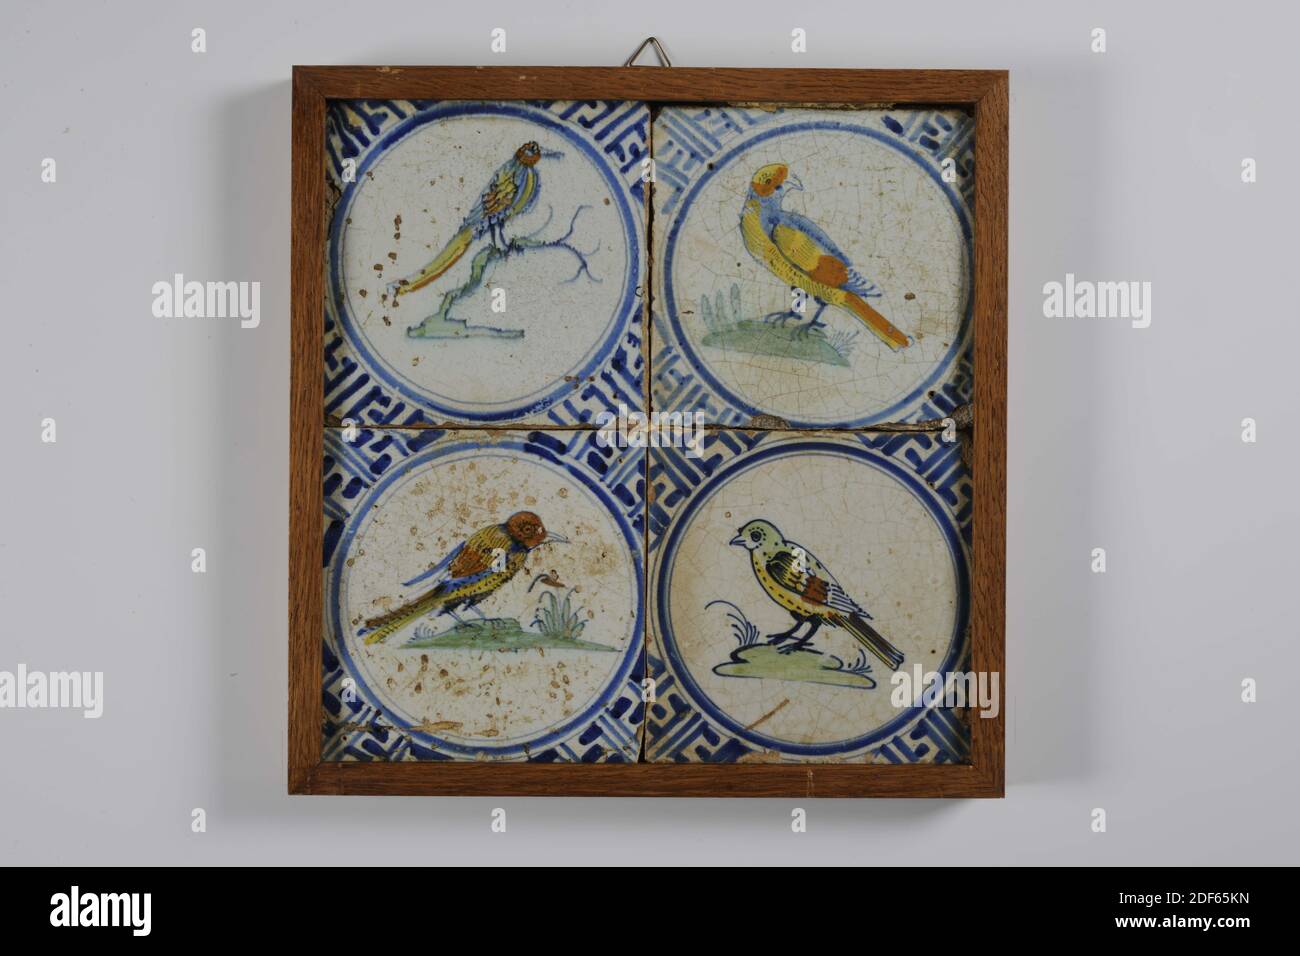 tile field, Anonymous, third quarter 17th century, tin glaze, earthenware, With frame: 28 x 27.5 x 2.5cm (280 x 275 x 25mm), bird, harlingen, Tile field of four tiles (two by two) of earthenware covered with tin glaze painted multicolored in blue, yellow, green and orange-brown. Birds are depicted within a circle on the tile field. Above left a bird with a long beak and a long tail on a branch facing right; top right a parrot-like bird facing left on a ground; Bottom left a fantasy bird on a ground pointing to the right; bottom right a tick on a ground. The tiles have a meander as a corner Stock Photo